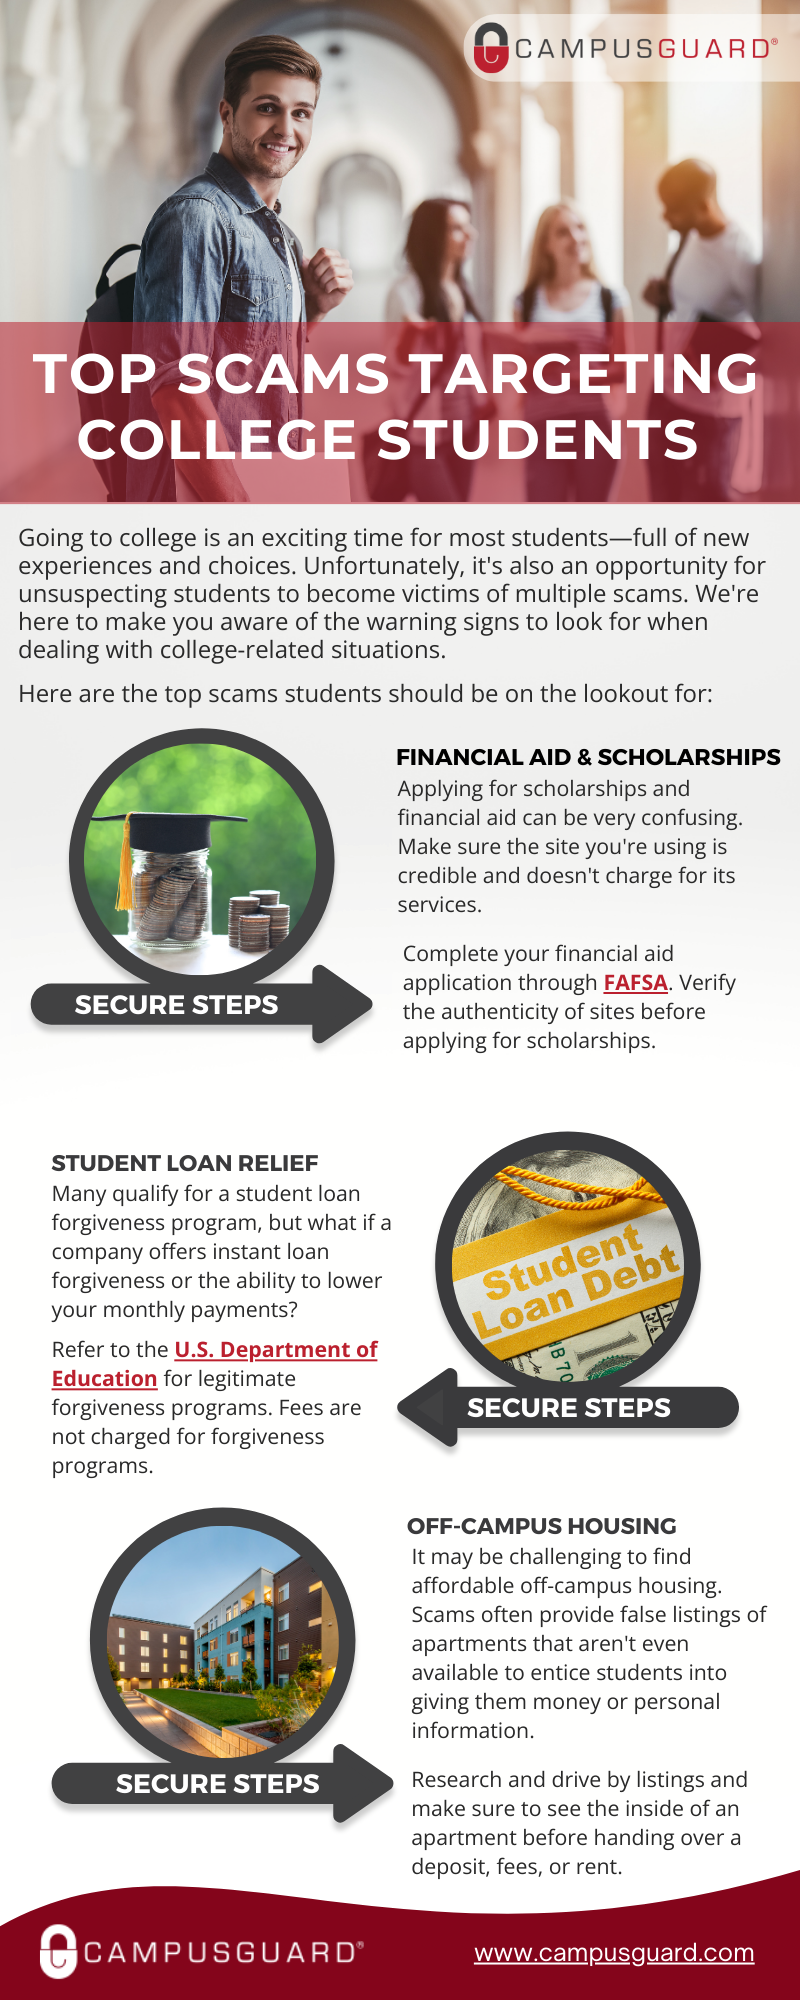 Top scams targeting college students - page 1